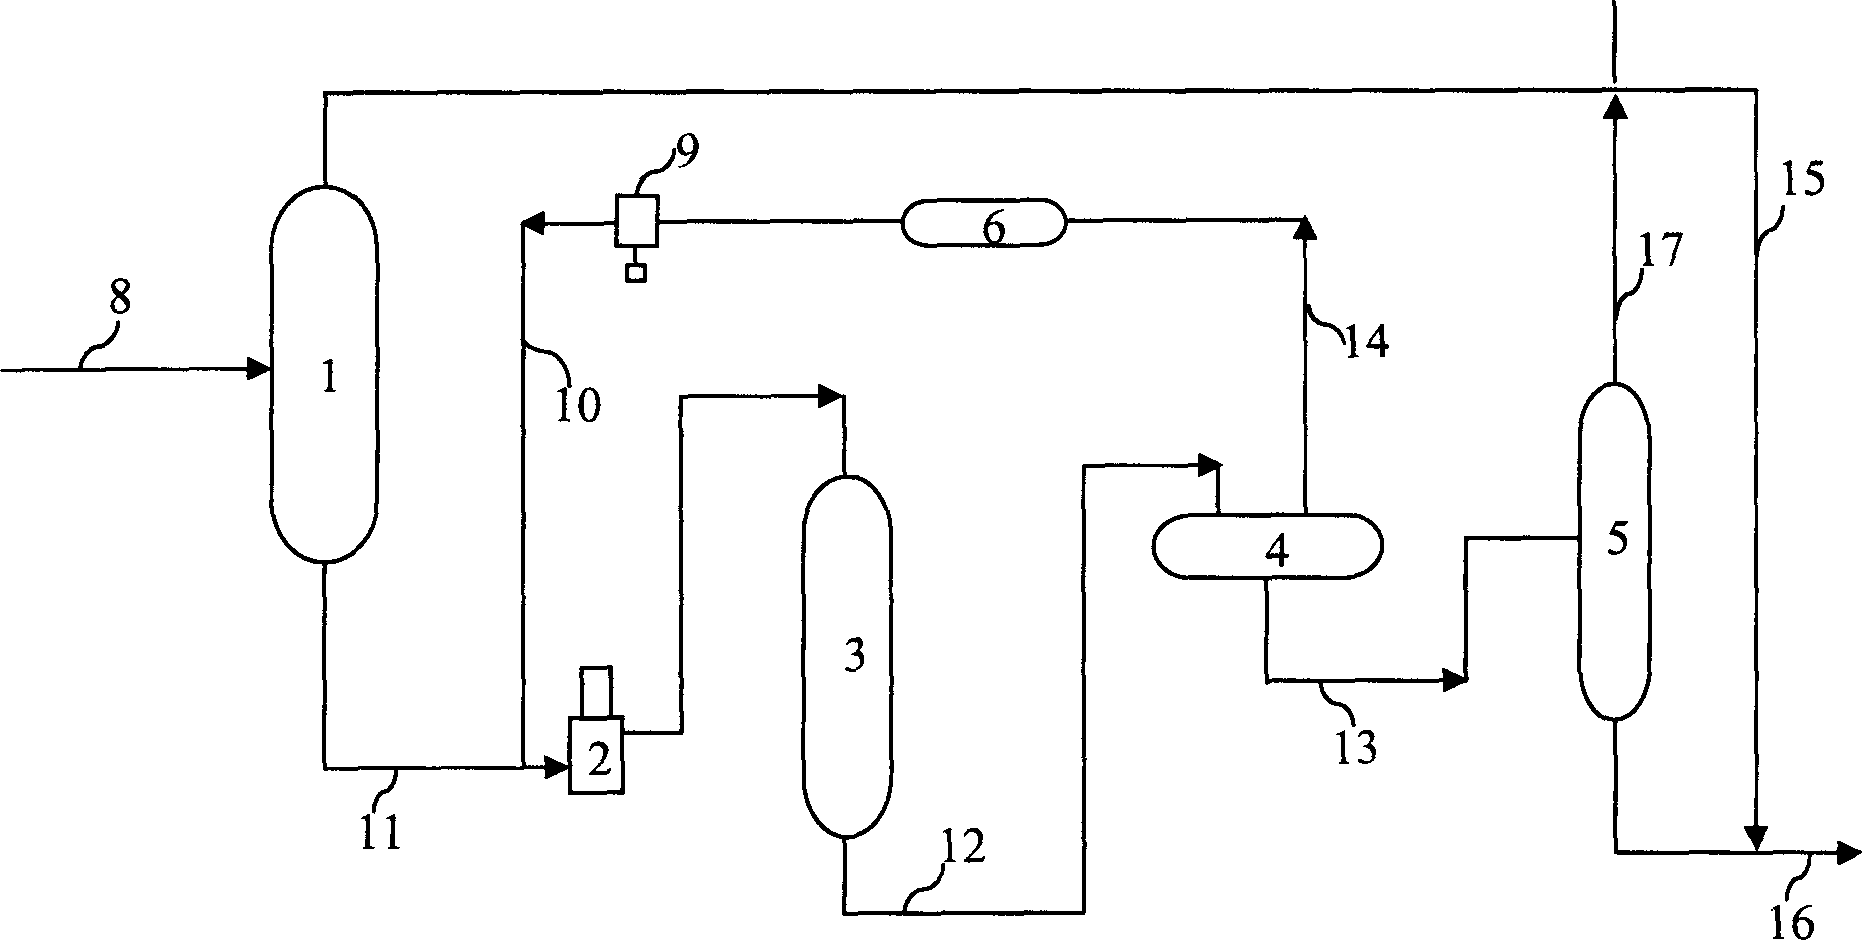 Method for isomerization of light hydrocarbon